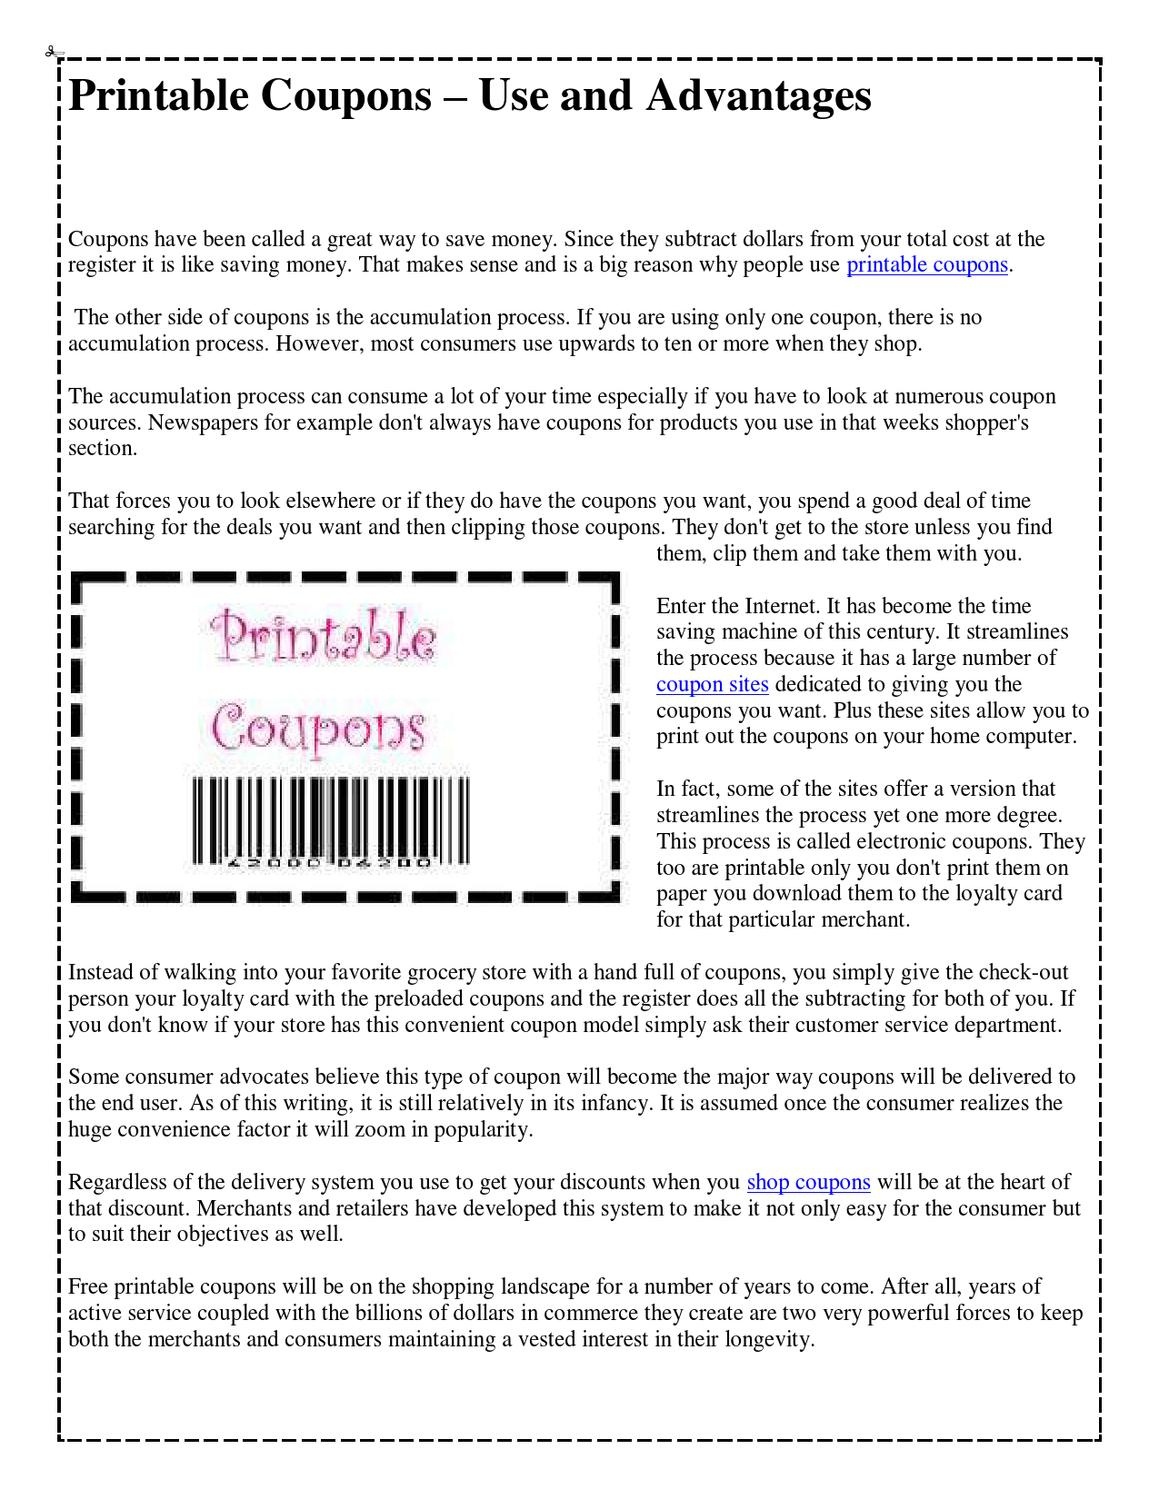 Free Printable Coupons Without Downloads Printable Free Templates 